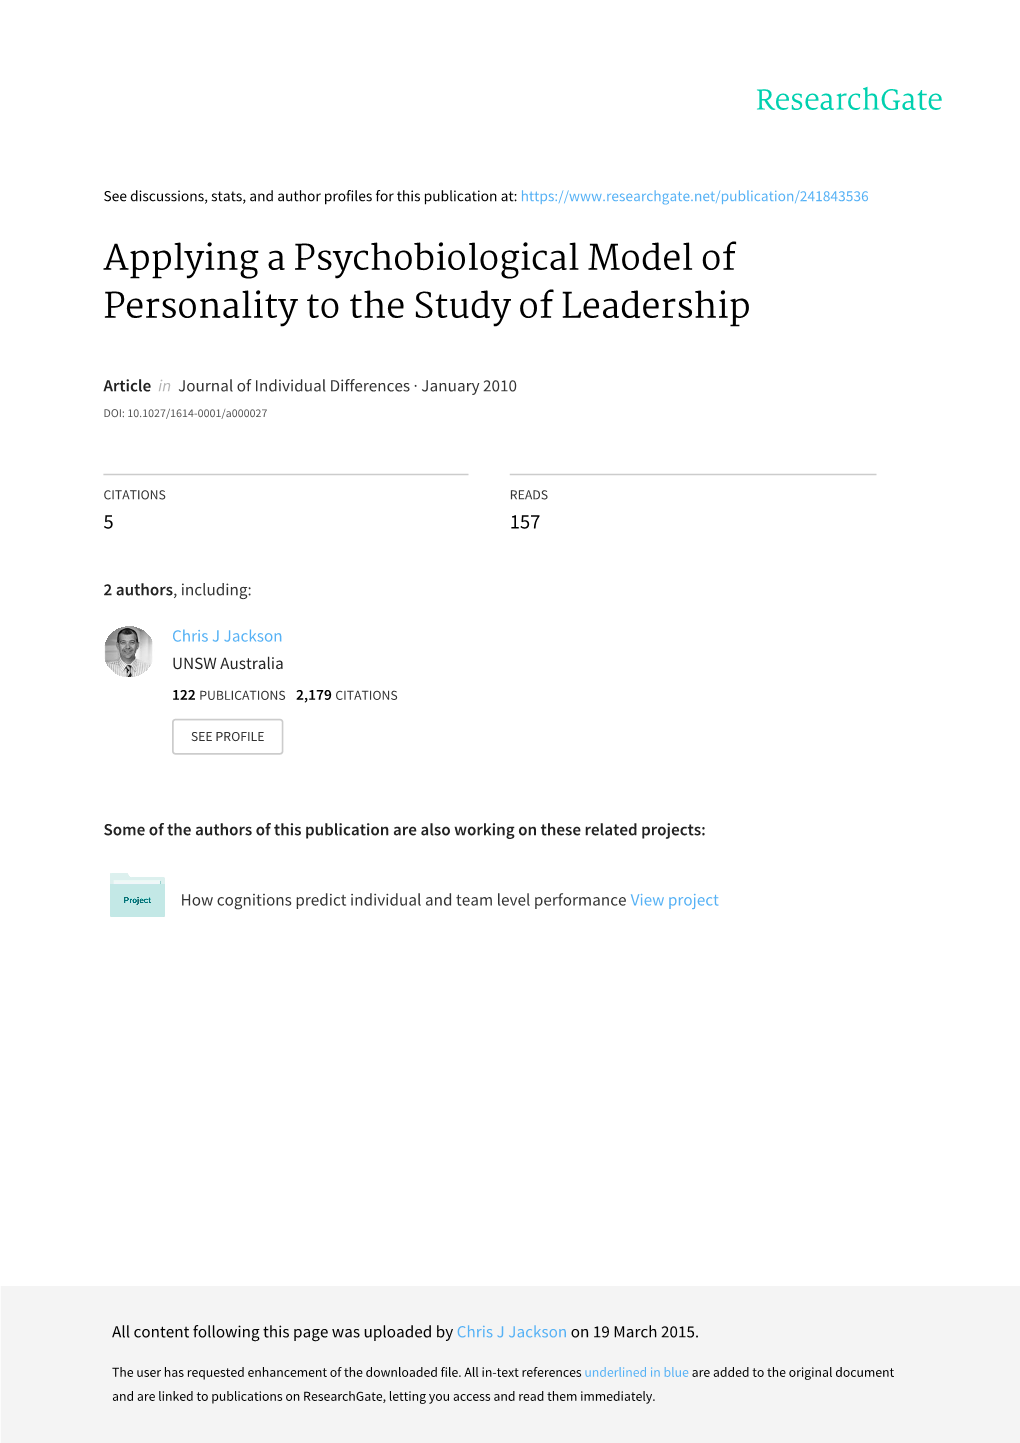 Applying a Psychobiological Model of Personality to the Study of Leadership